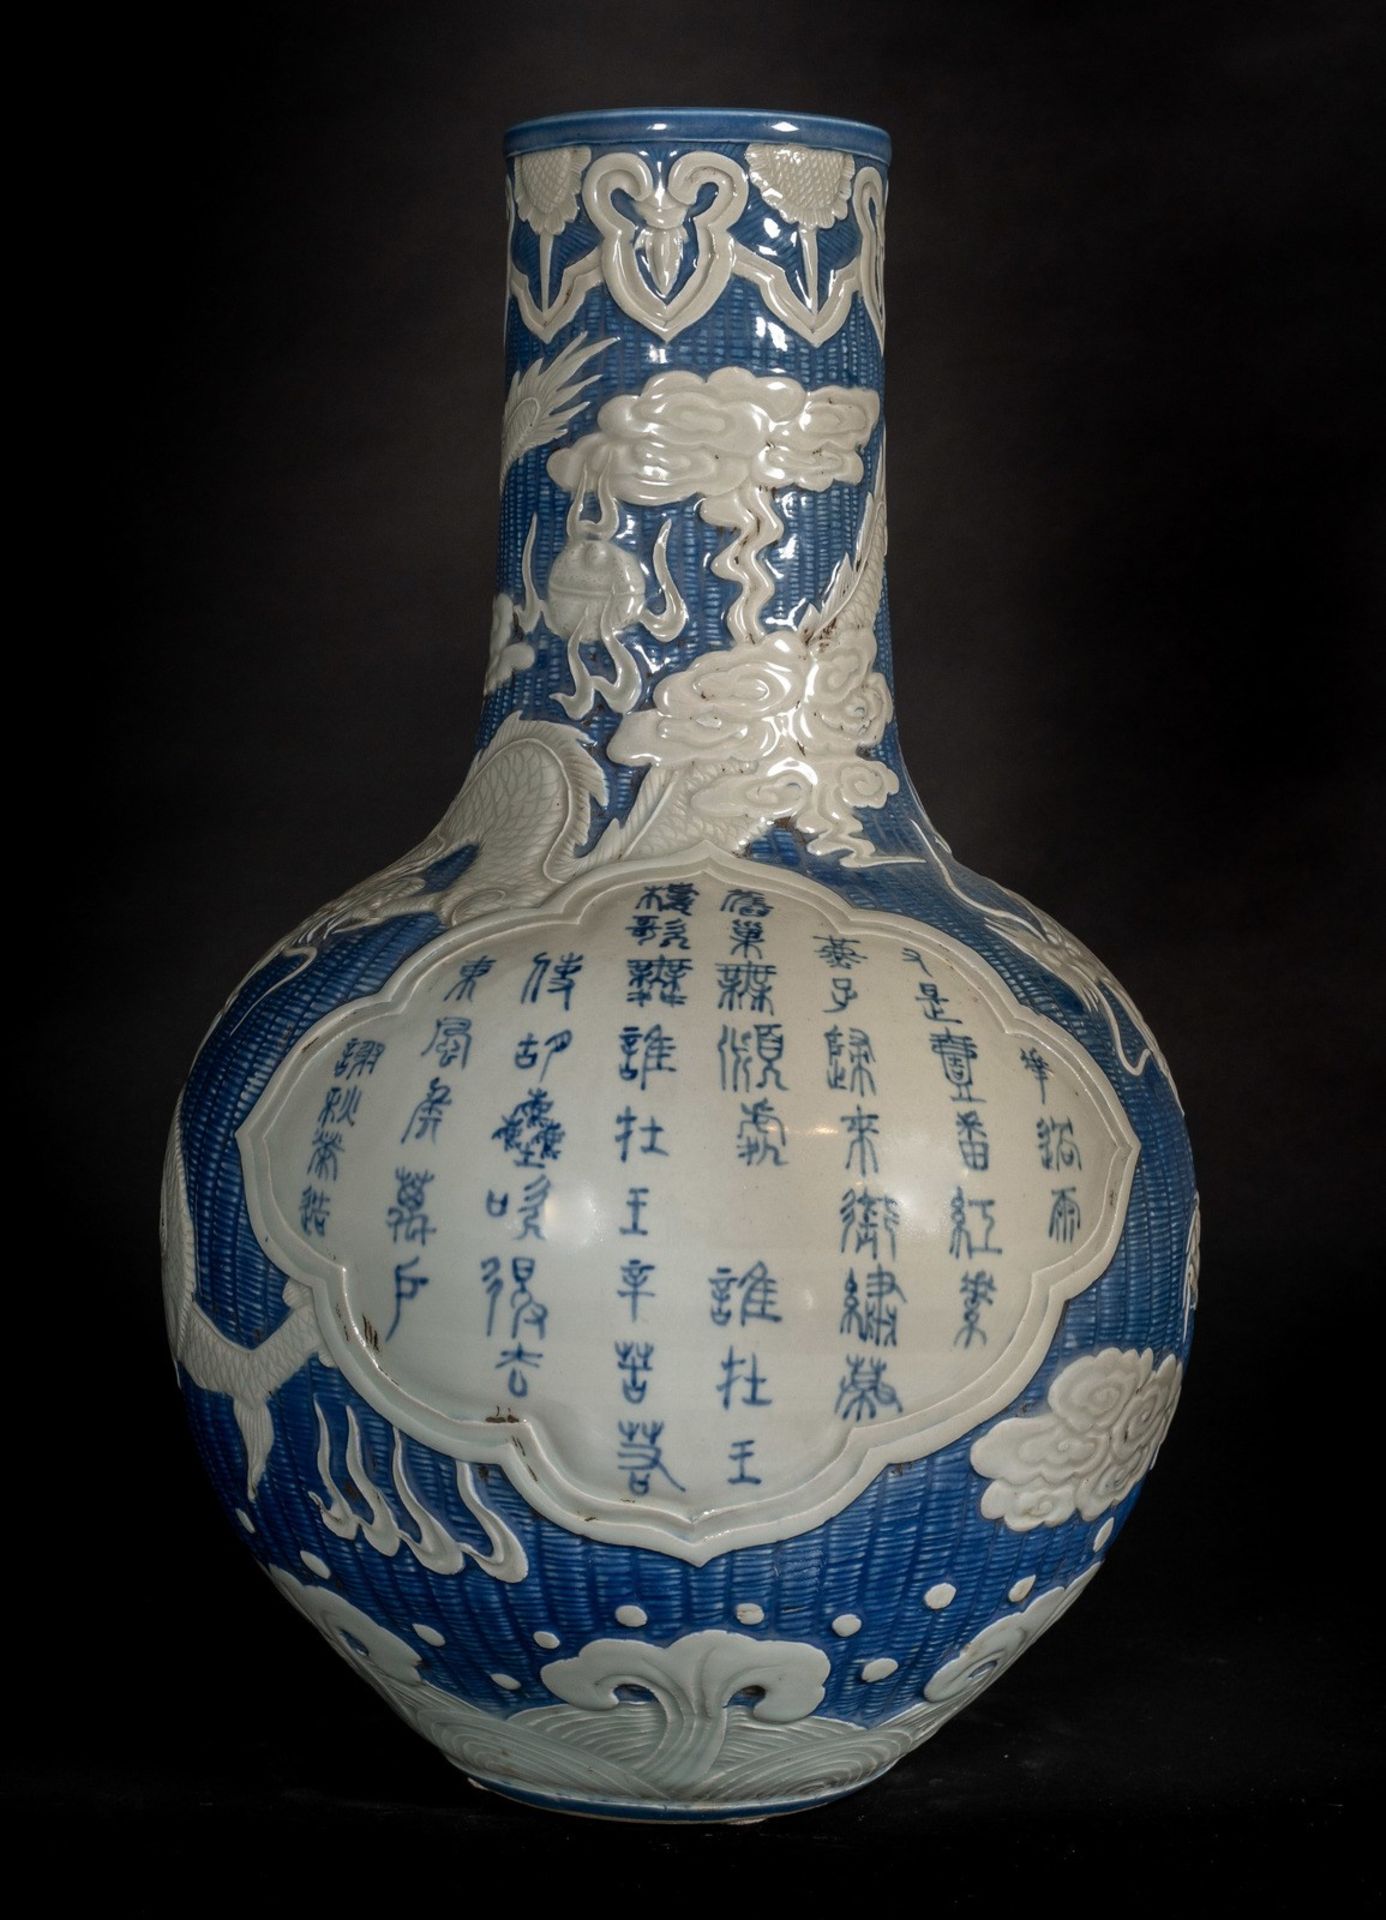 Arte Cinese A blue and white porcelain tianchuping globular vase with dragon and inscription China,